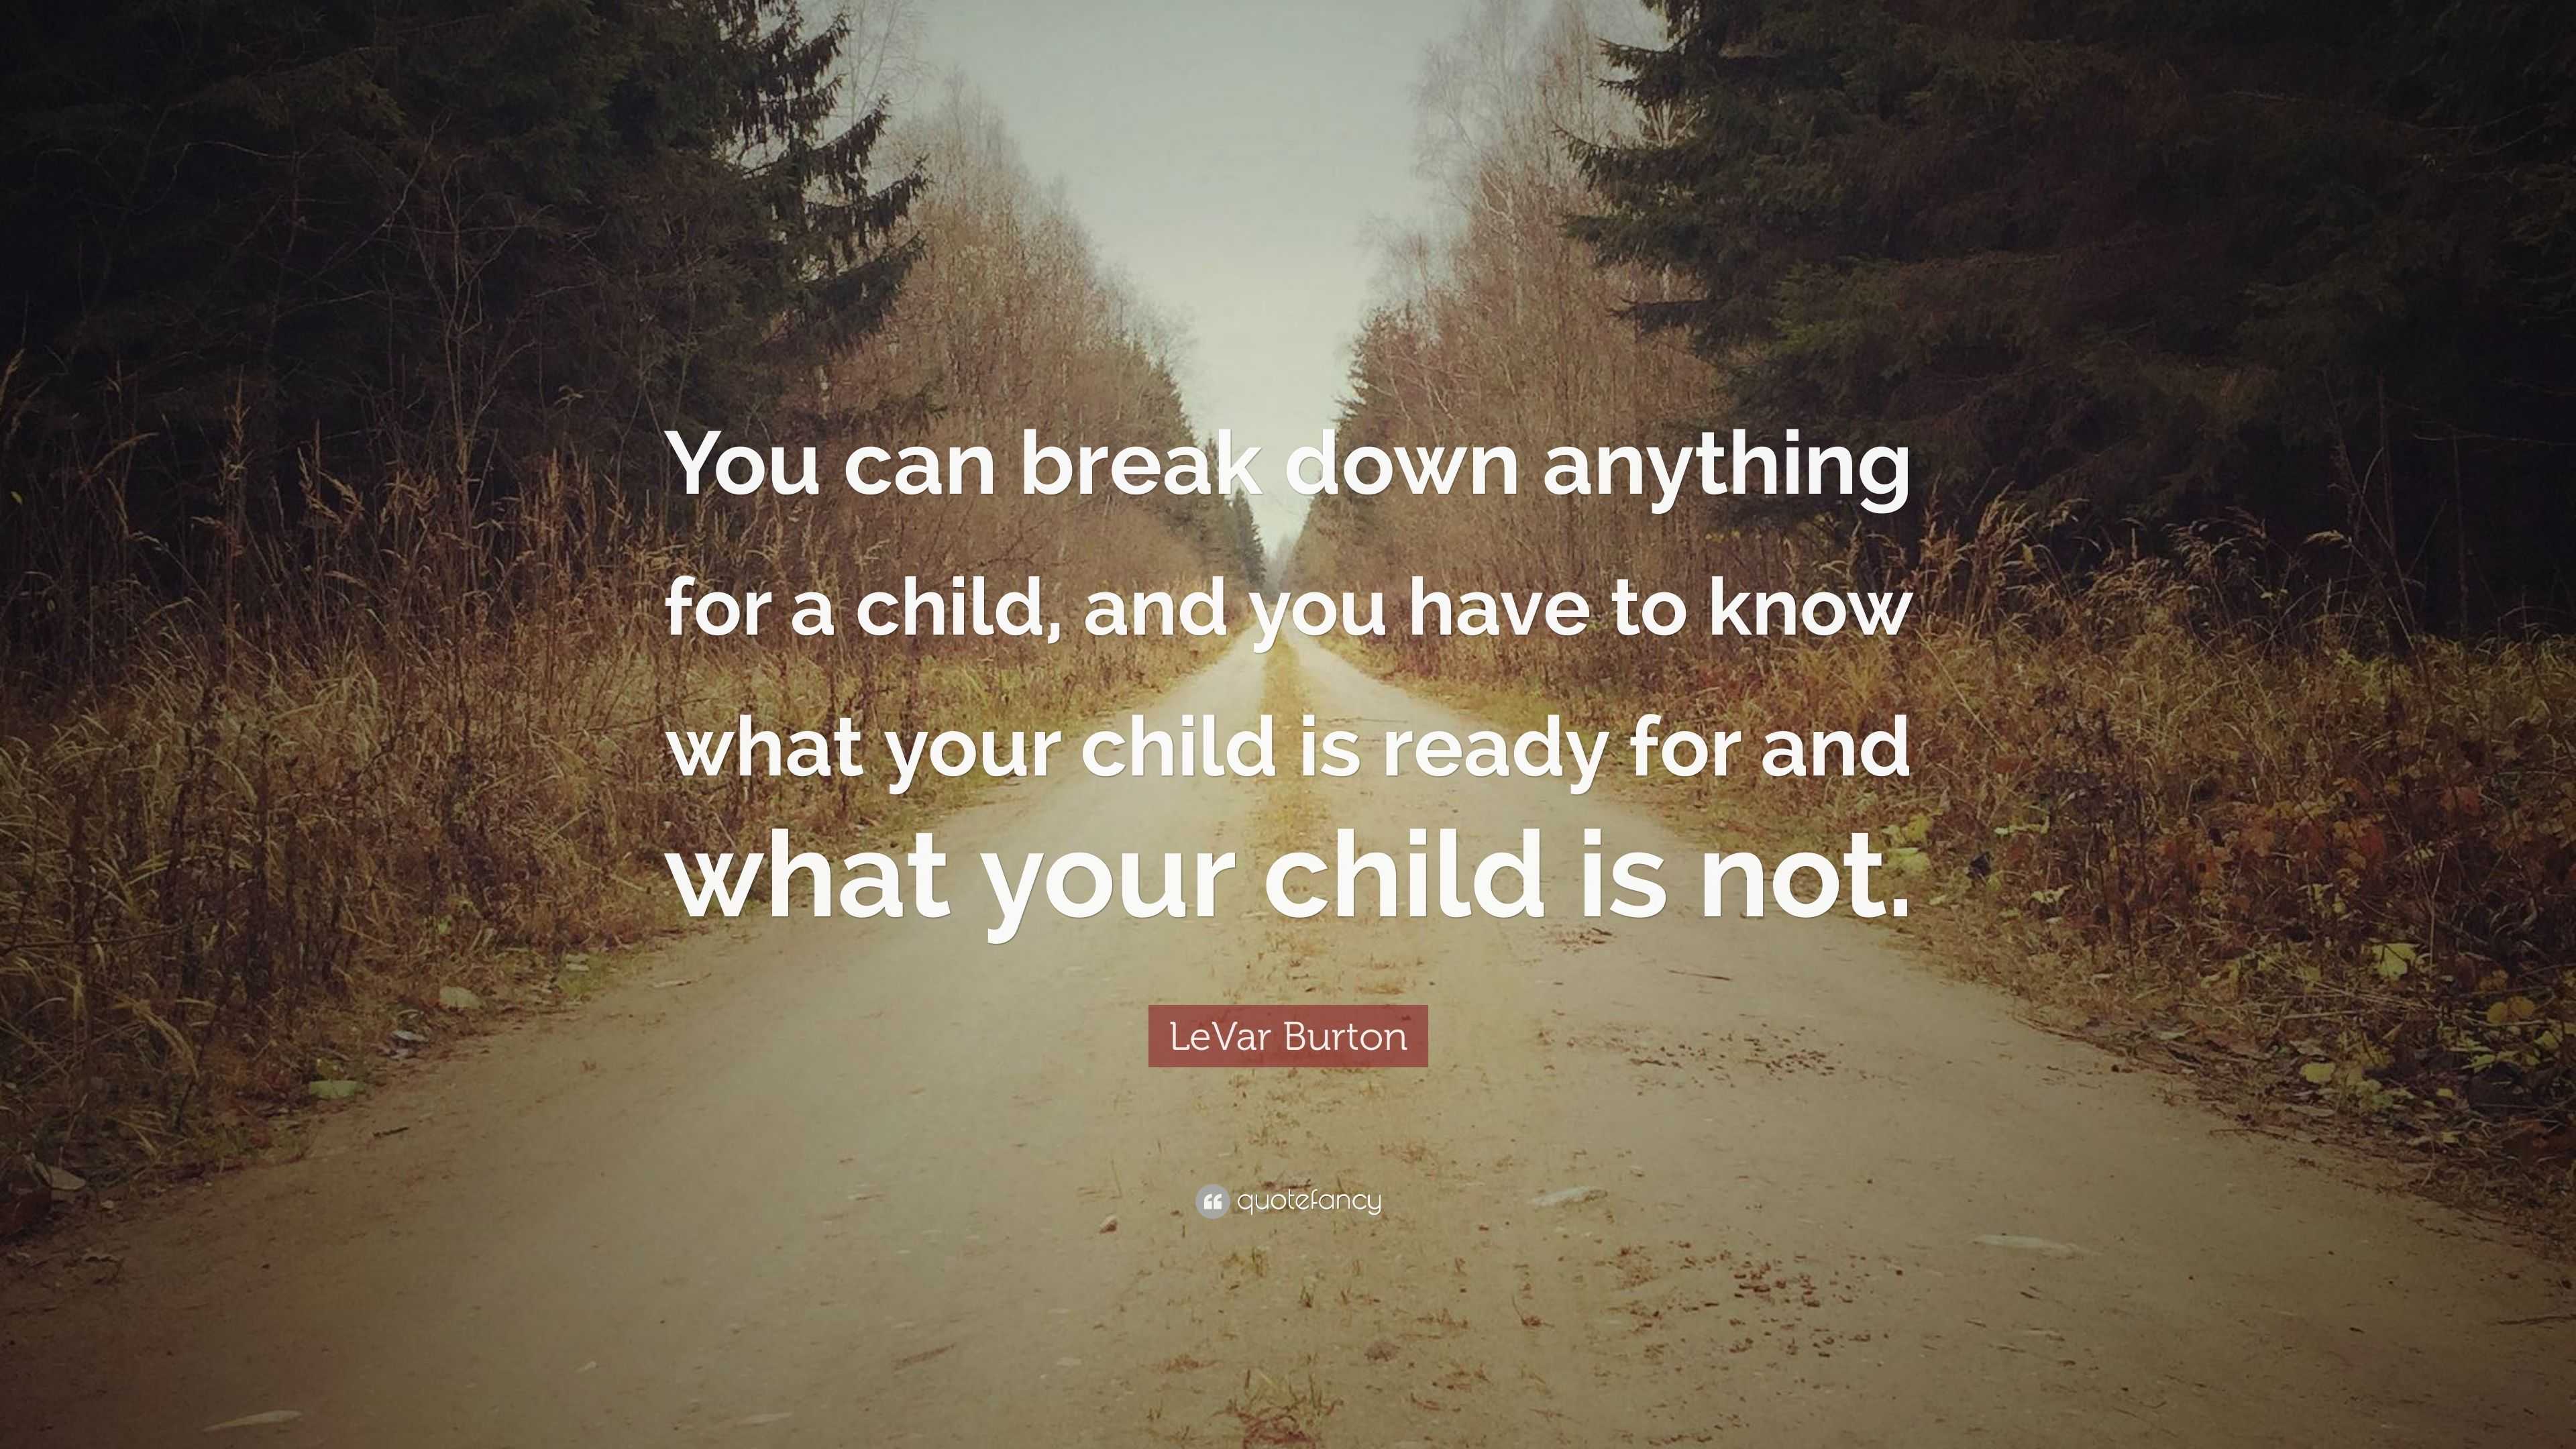 LeVar Burton Quote: “You can break down anything for a child, and you ...